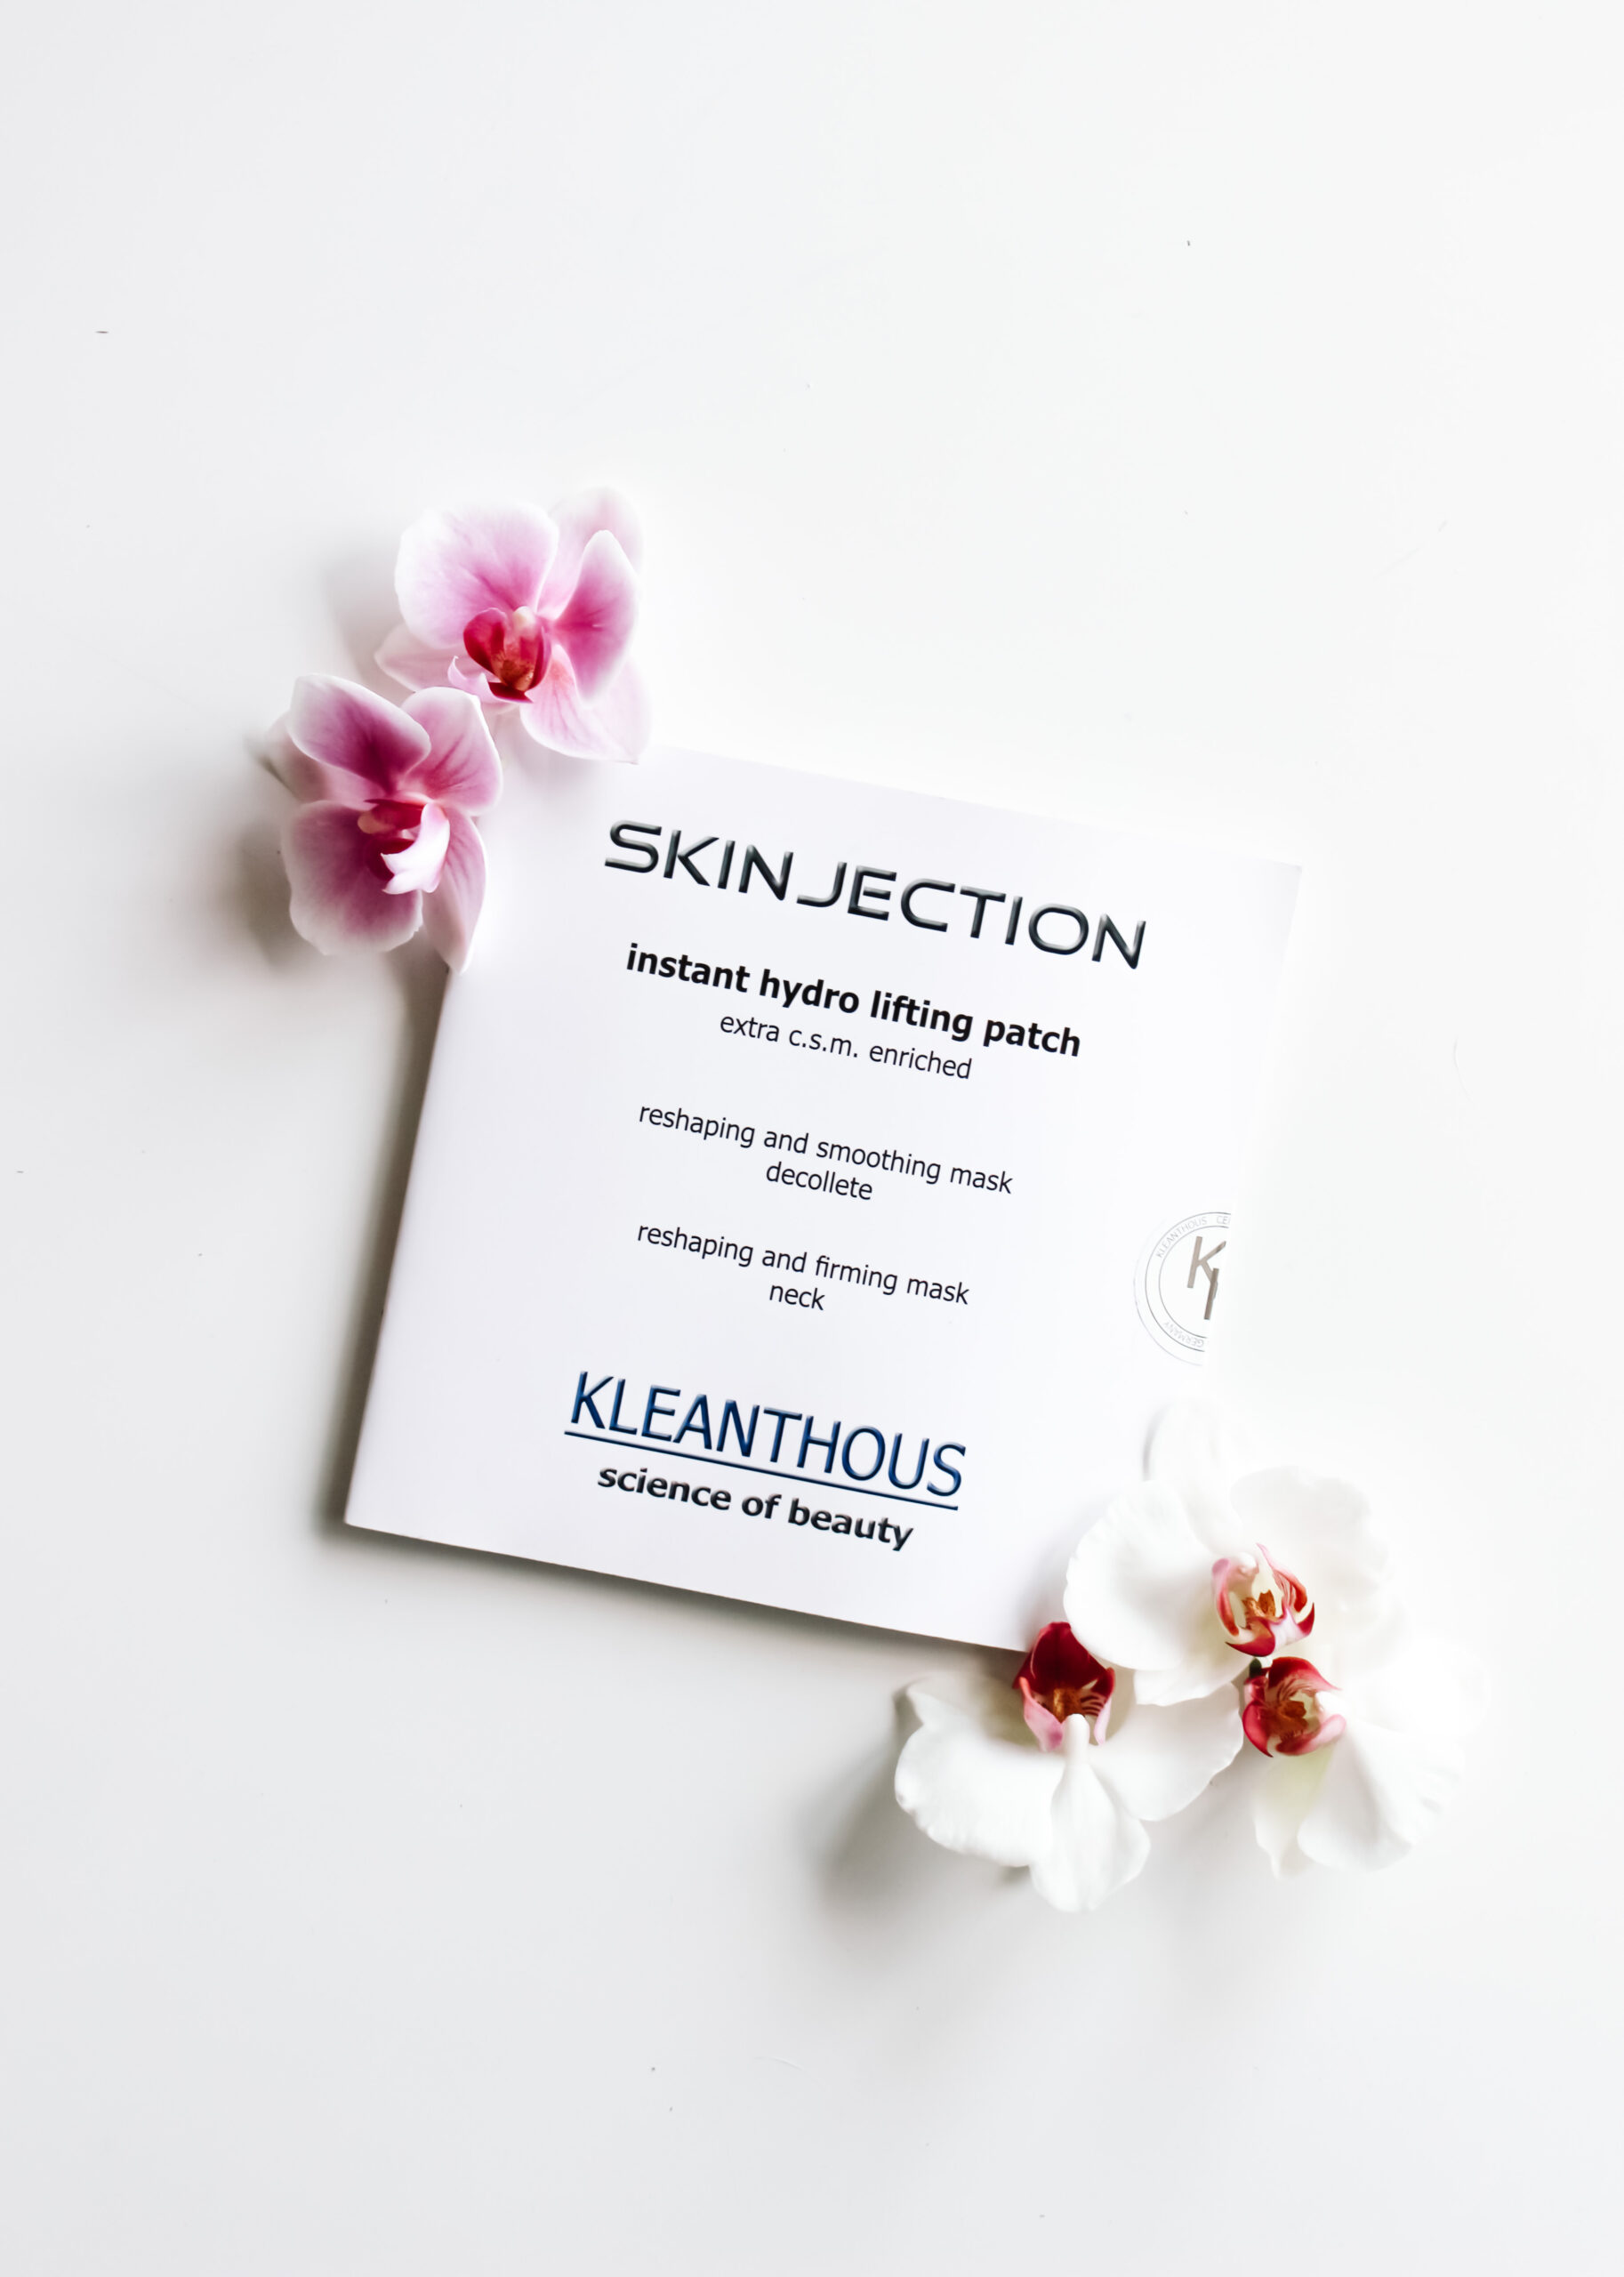 SKINJECTION instant hydro lifting patch face 17 ml